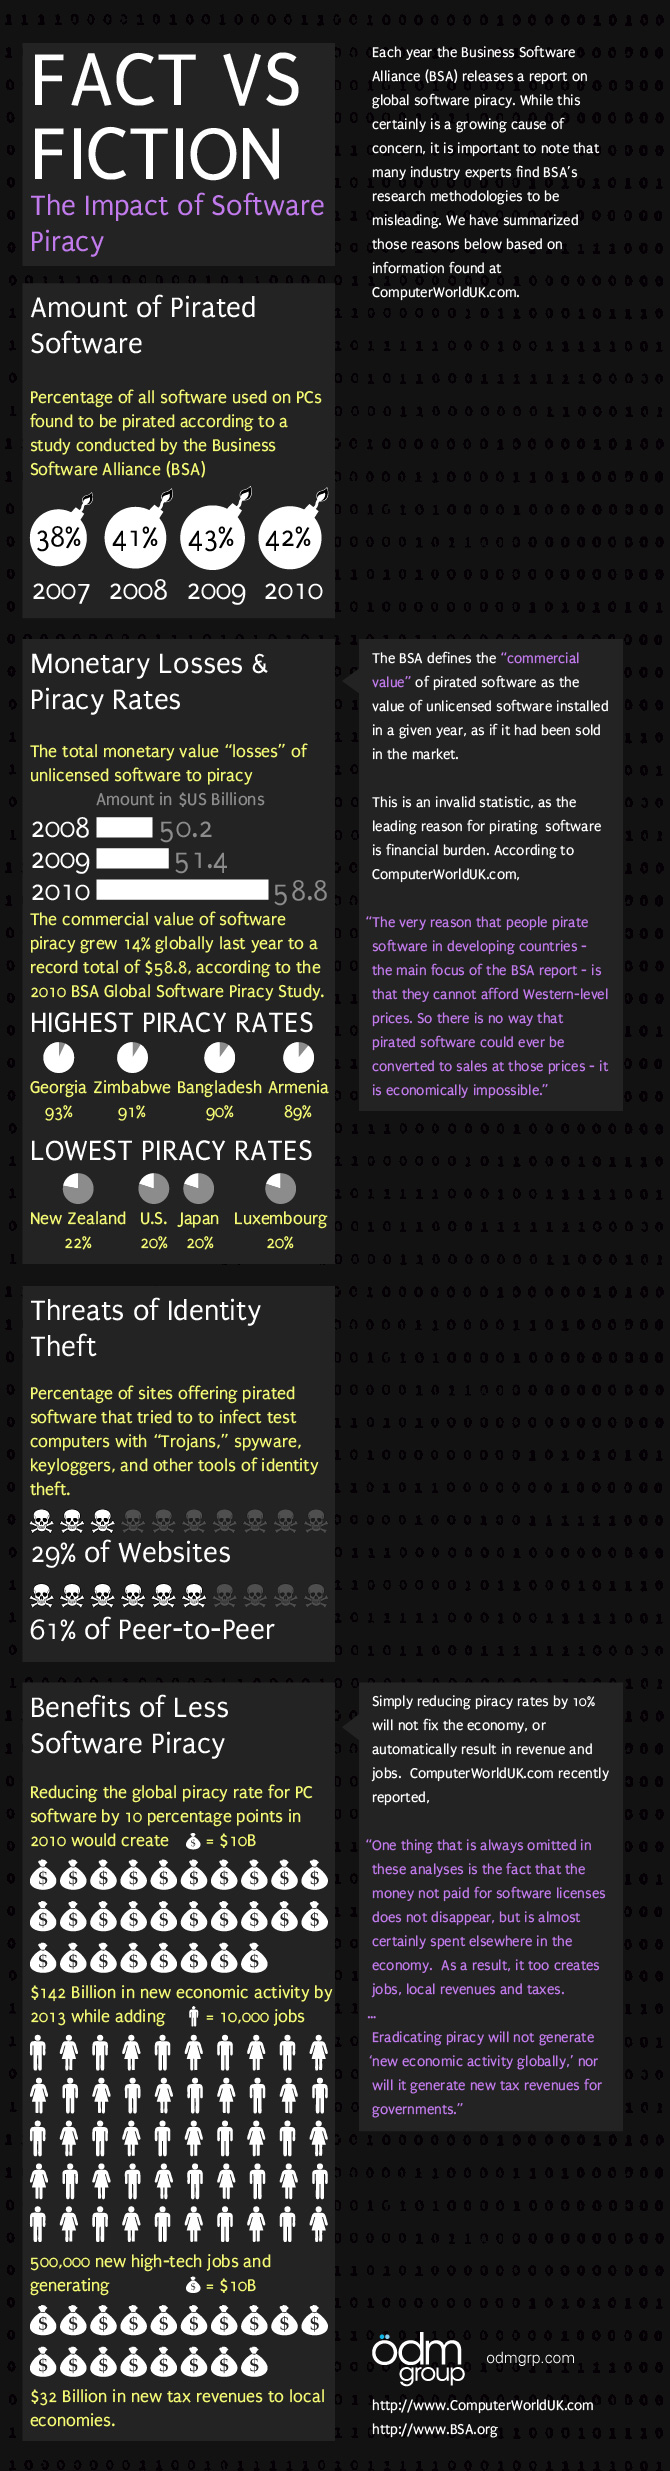 Fact vs. Fiction: The Impact of Software Piracy